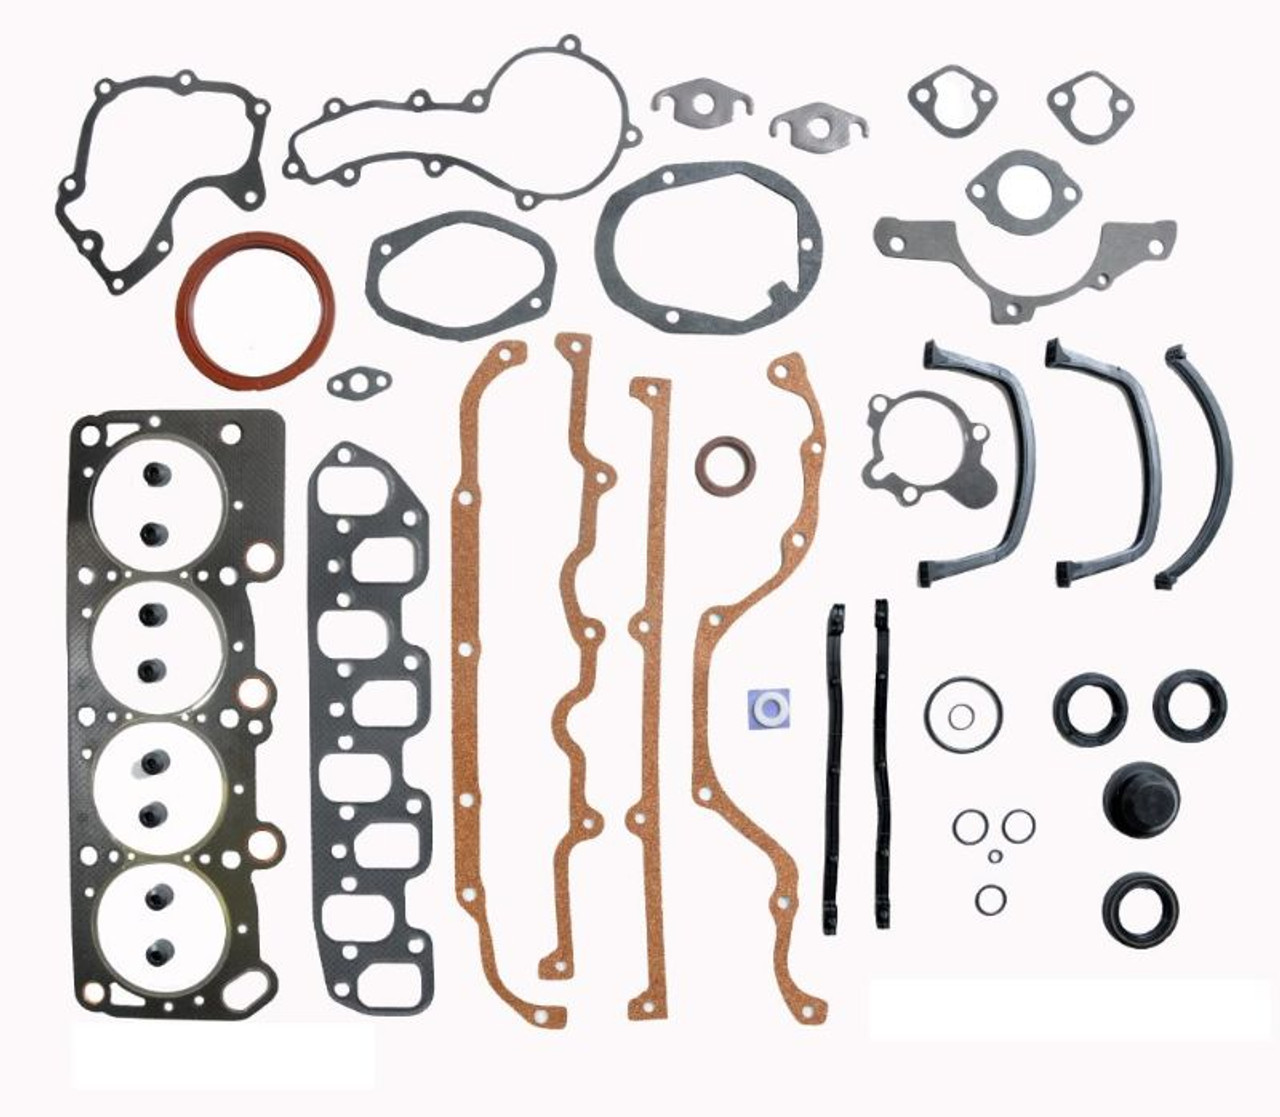 1987 Plymouth Reliant 2.5L Engine Gasket Set CR2.5-17 -21